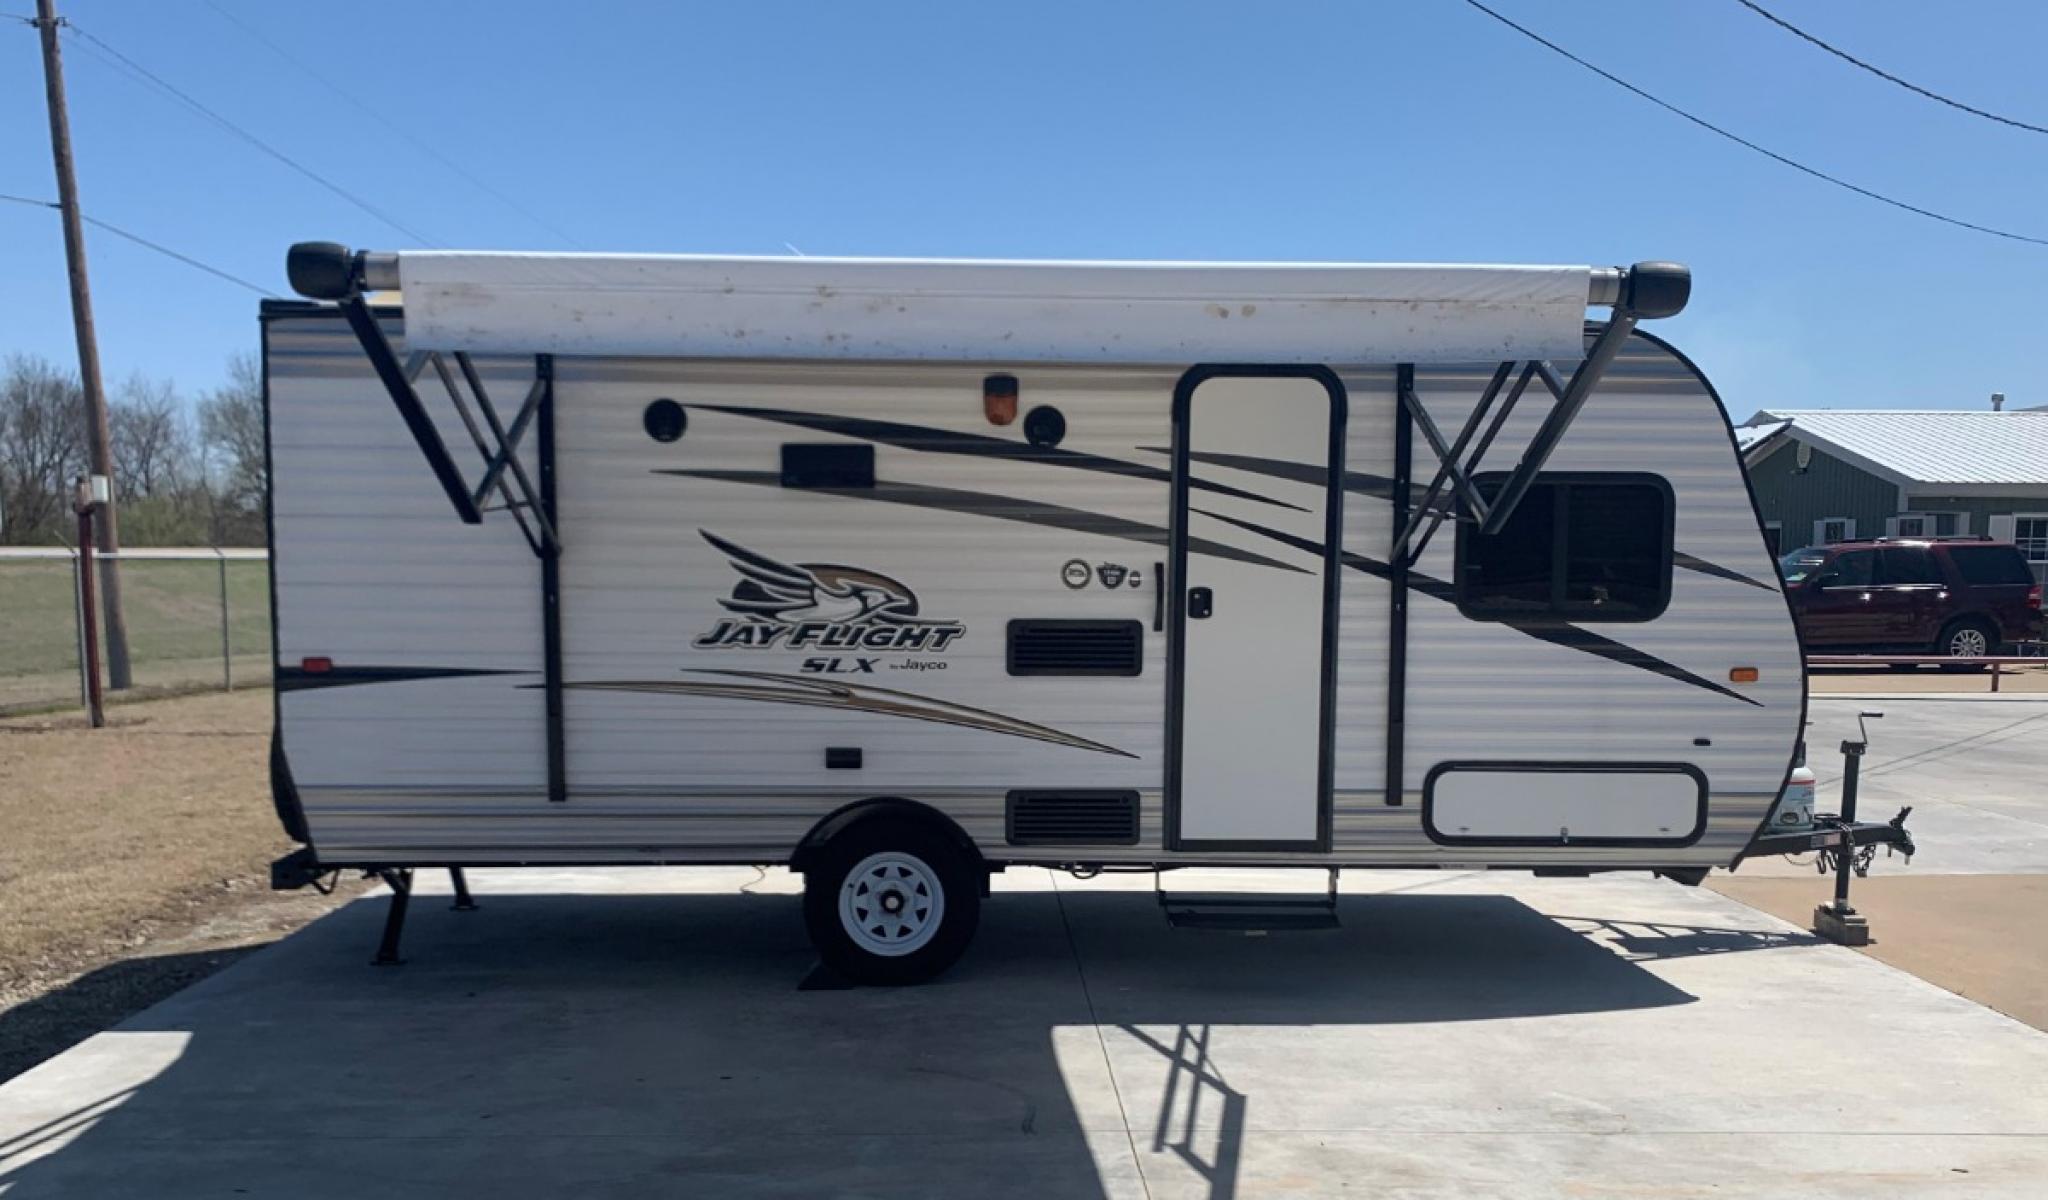 2016 TAN JAYCO Unknown 174BH (1UJBJ0AJ9G1) , located at 17760 Hwy 62, Morris, OK, 74445, 35.609104, -95.877060 - 2016 JAYCO JAY FLIGHT SLX 174BH IS 21.5FT LONG. THE OUTSIDE FEATURES A 10FT POWER AWNING, OUTSIDE STORAGE, OUTSIDE SPEAKERS, SINGLE AXLE, REAR MANUAL LEVELING JACKS, AND SPARE TIRE. AS YOU ENTER THE CAMPER, YOU WILL NOTICE THAT THERE ARE 5 WINDOWS SO YOU CAN LET NATURAL SUNLIGHT IN, THE QUEEN BE - Photo #1